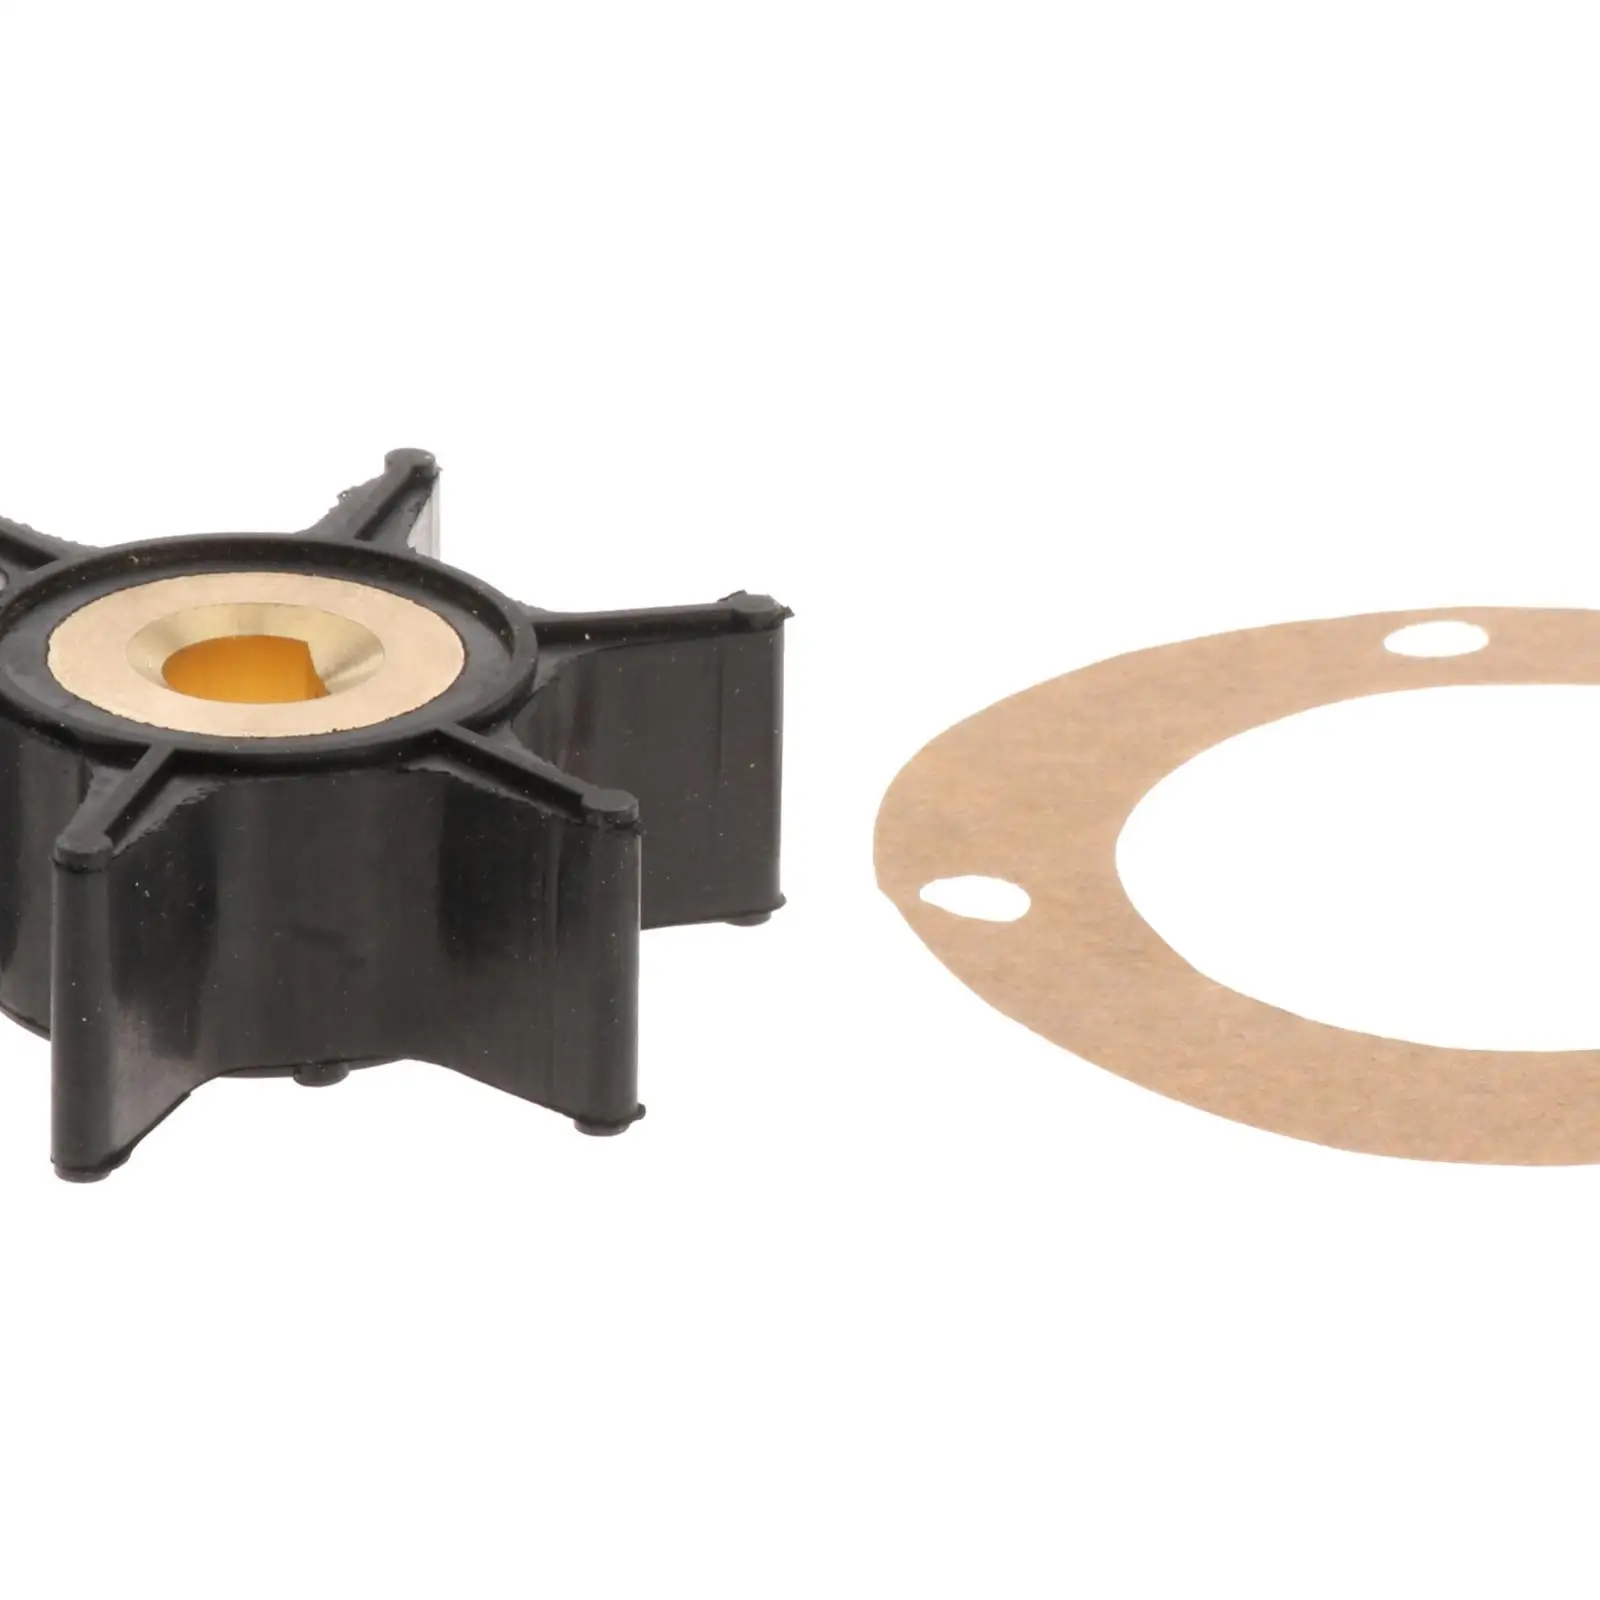 2Pcs Impeller and 4-Hole Gasket Kit Accessories Repair Kit Parts Impeller Kit Fits for Onan 131-0386 170-3172 Mcck 4.0 kW Pump